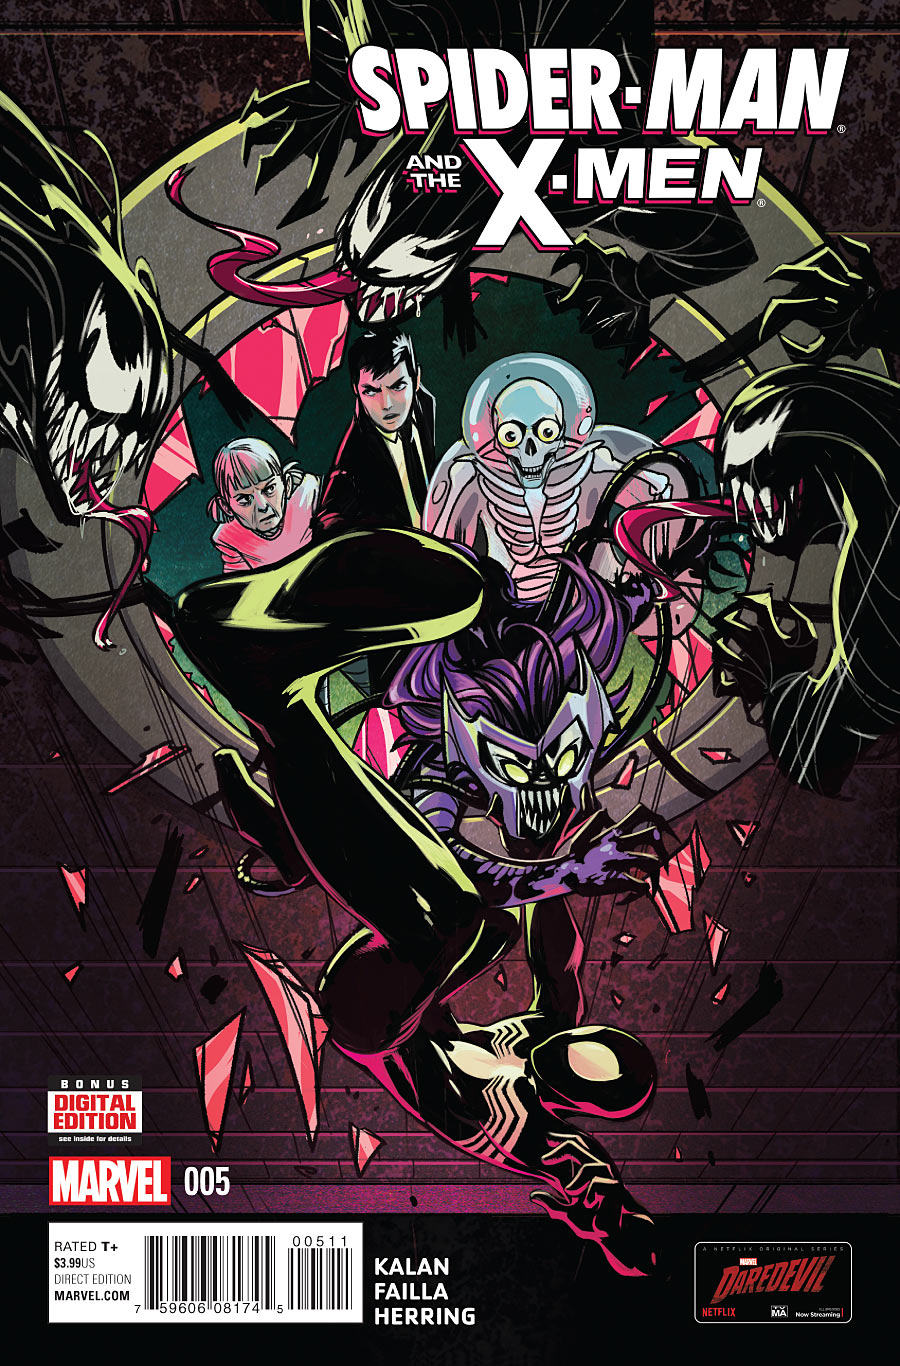 Spider-Man and the X-Men Vol. 1 #5